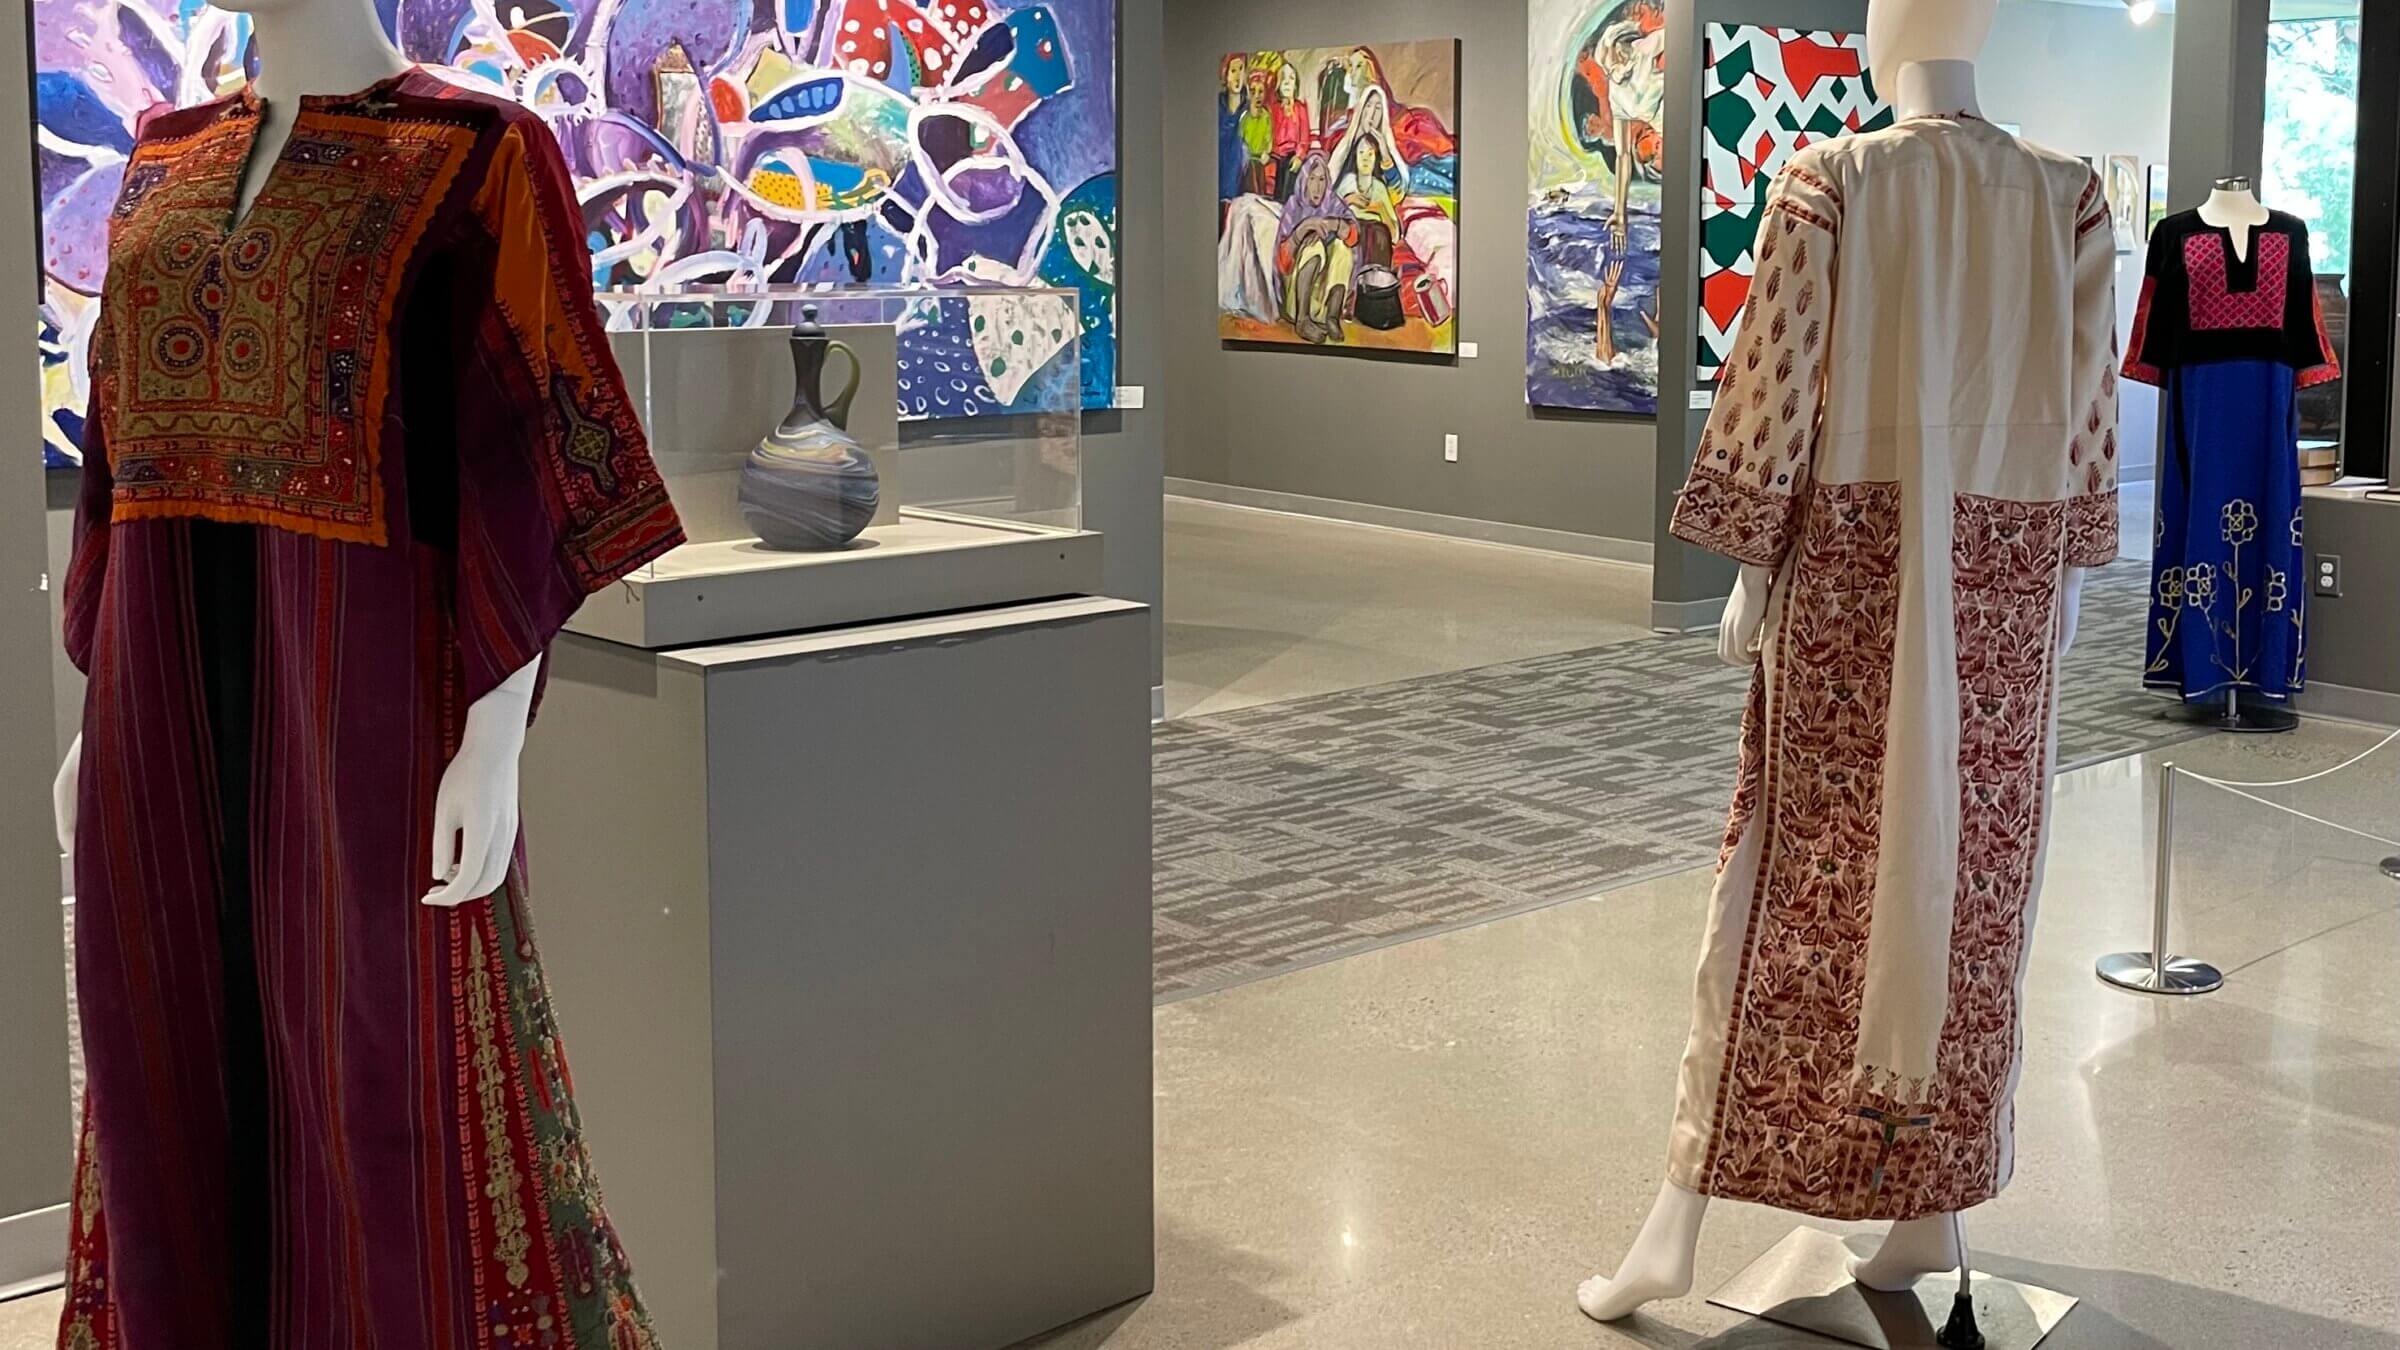 Faisal Saleh views his four-year-old museum — the only one one in the nation dedicated to Palestinian art and culture — as a place where Muslims, Jews and Christians can connect through culture.